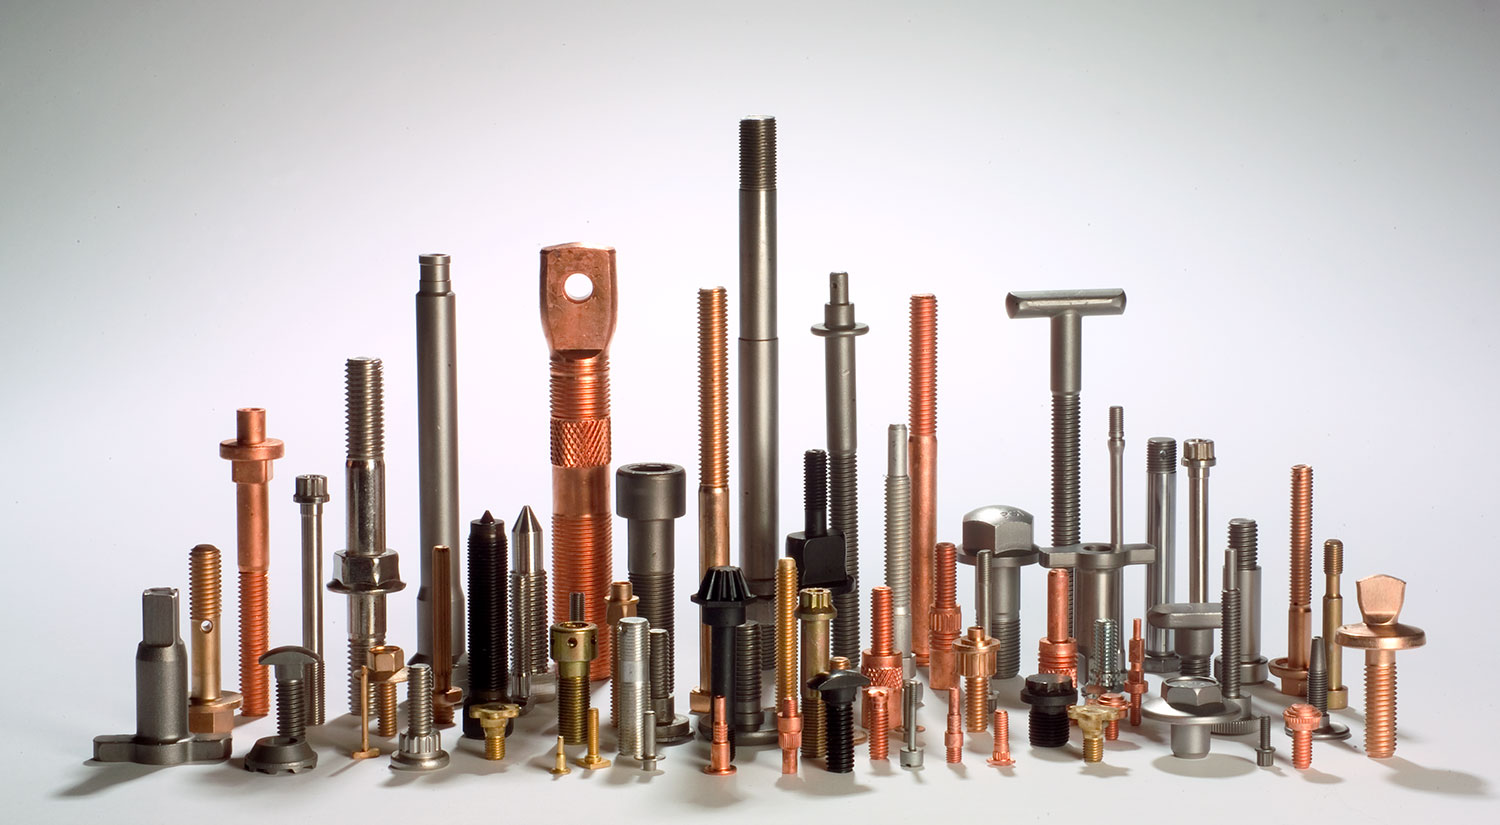 fasteners join our team